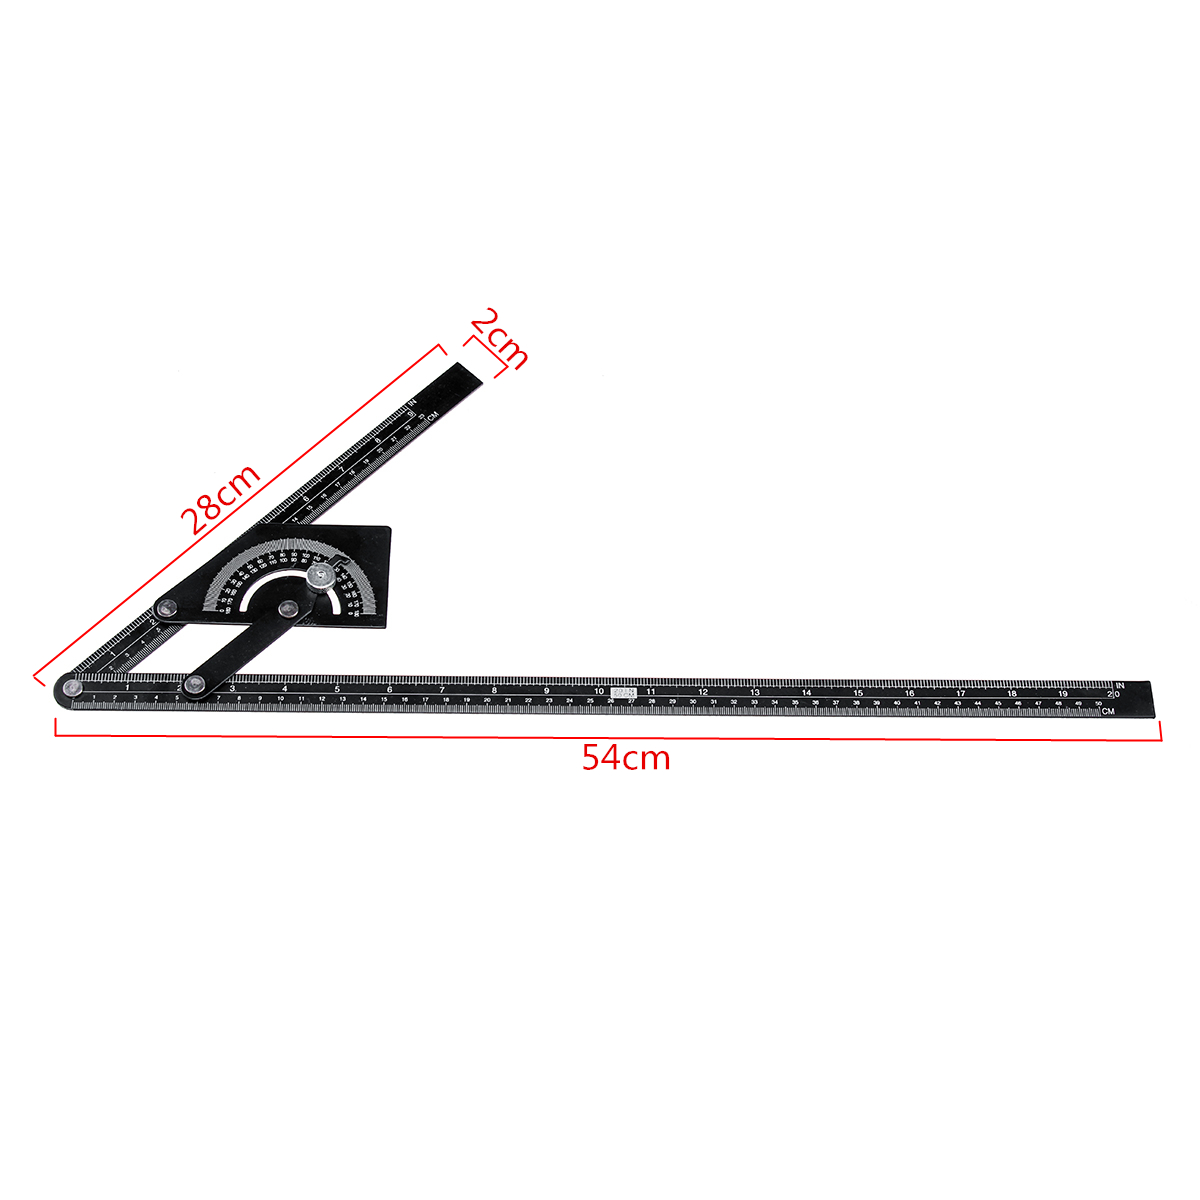 Angle-Ruler-Angle-Protractor-Stainless-Steel-180deg-Angle-Finder-Measure-Ruler-Gauge-Tool-230x500mm-1332790-3